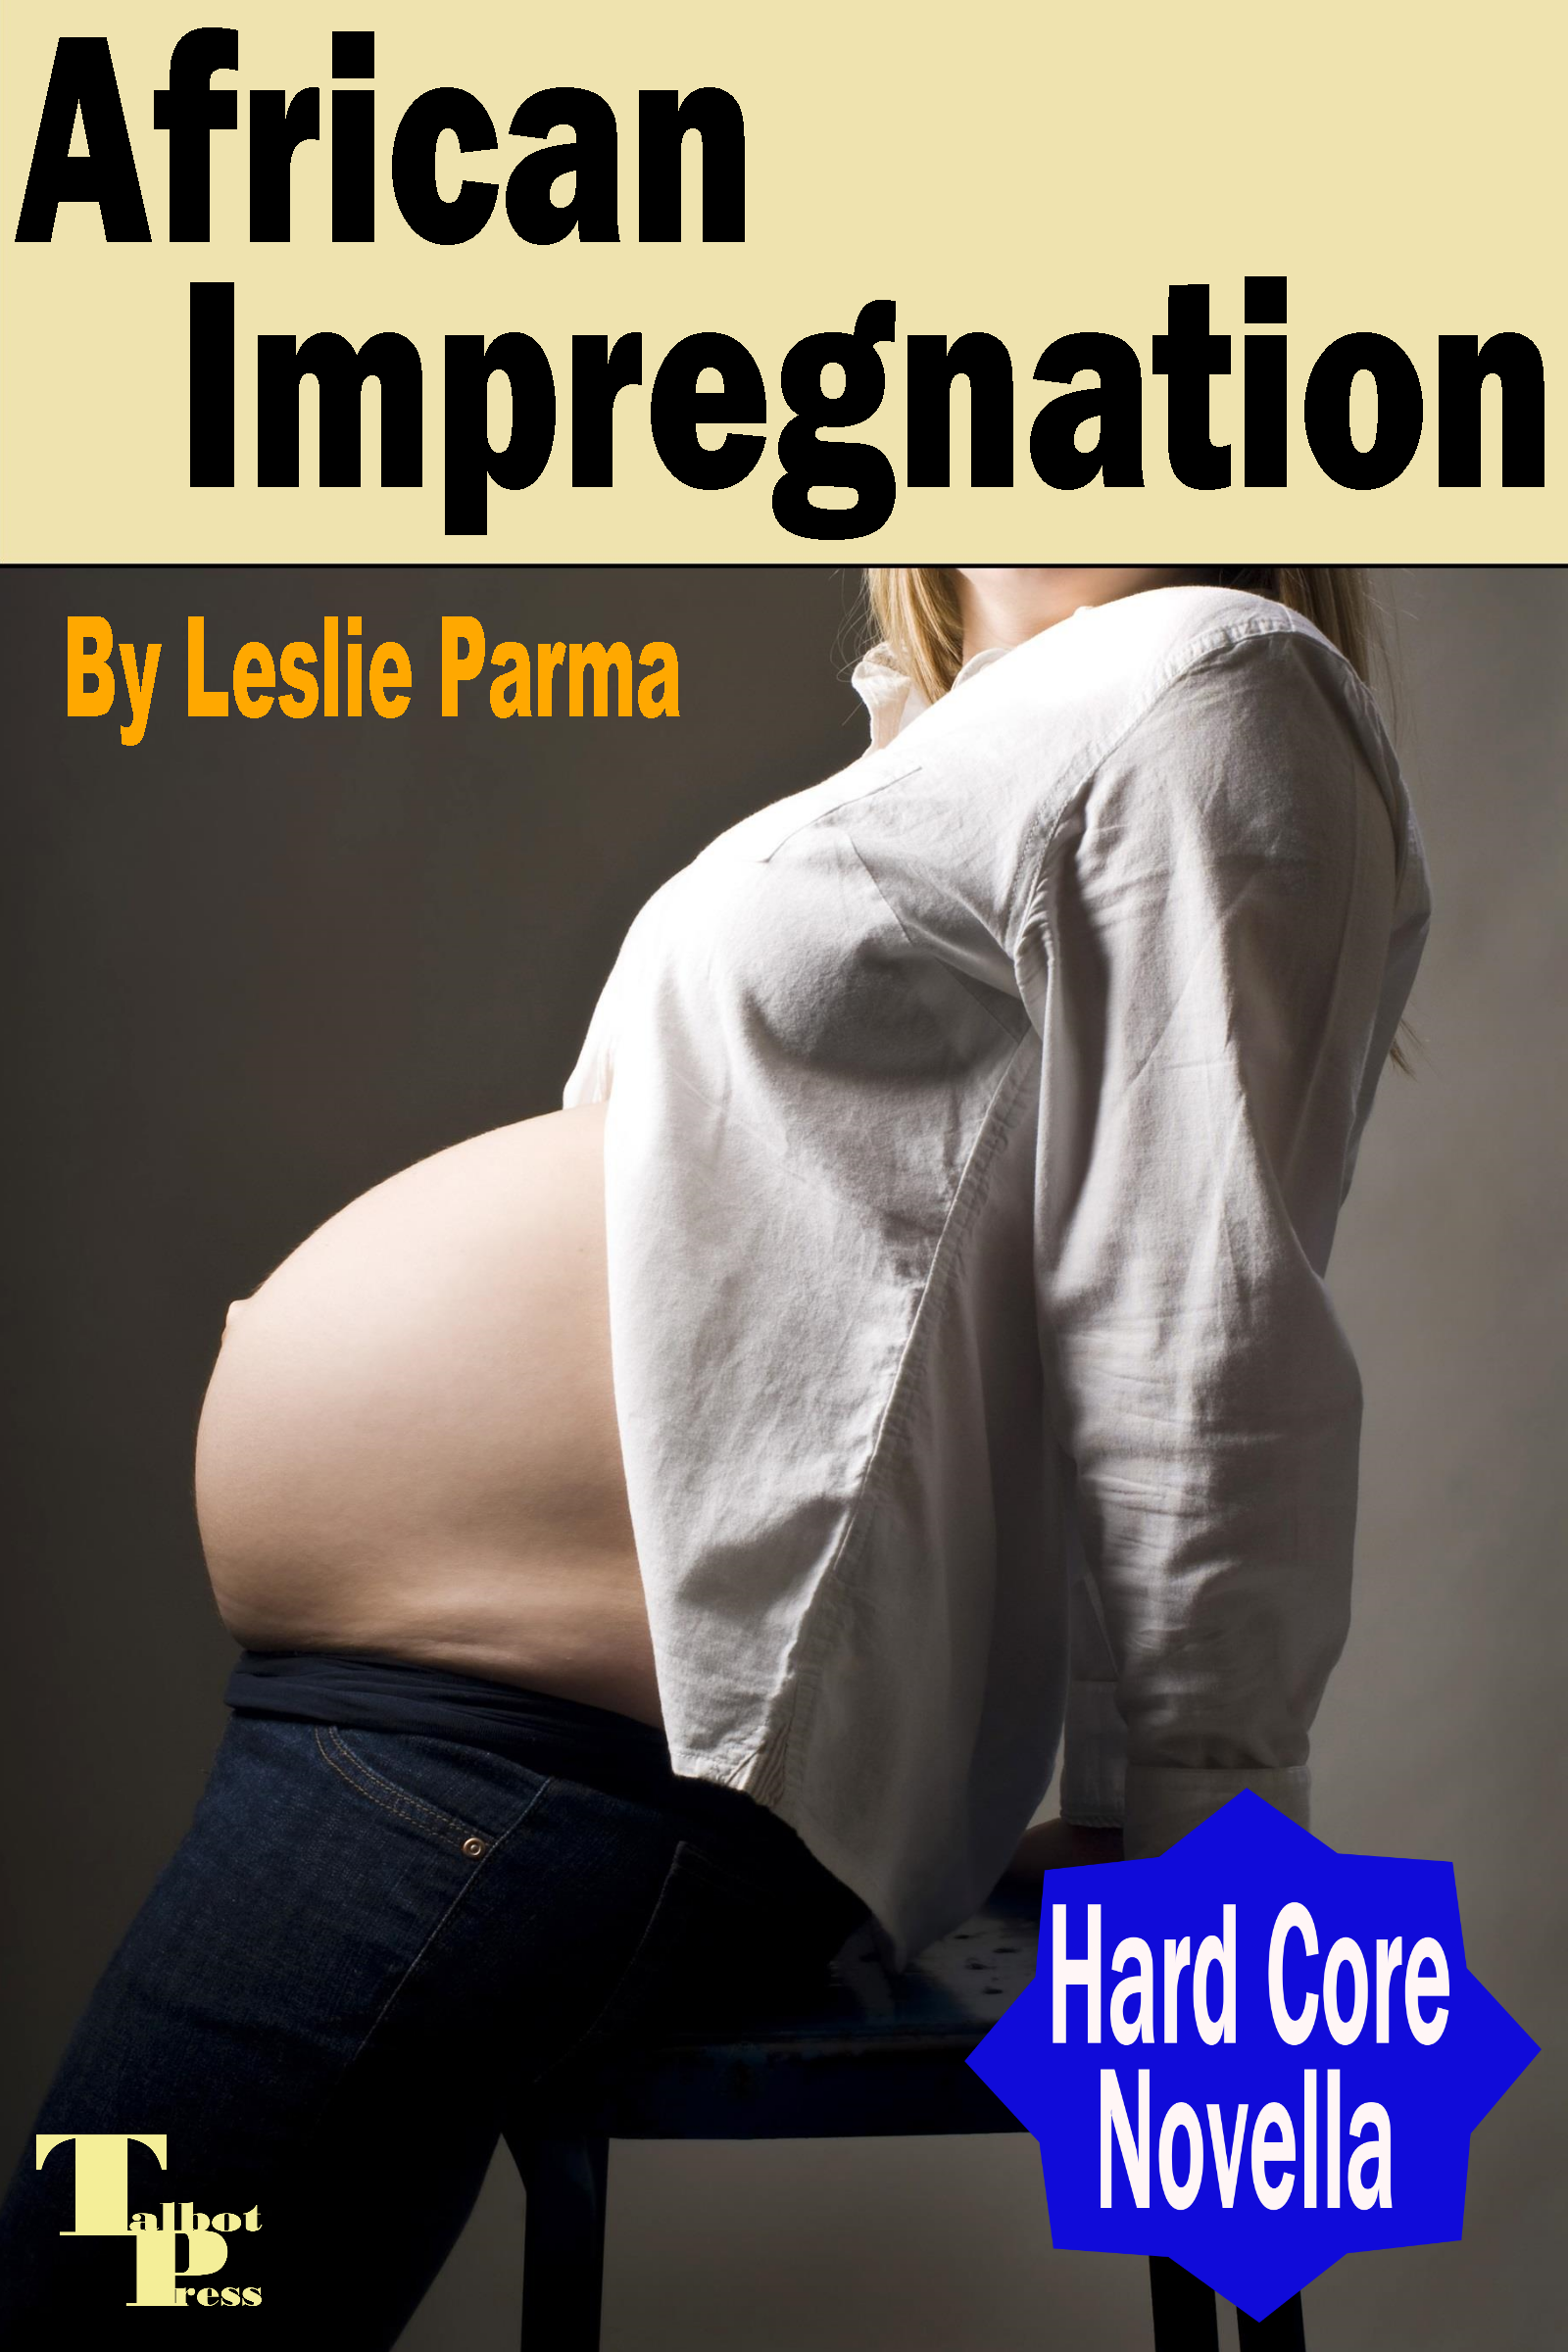 Interracial Impregnation Photo Series - African Impregnation, an Ebook by Leslie Parma